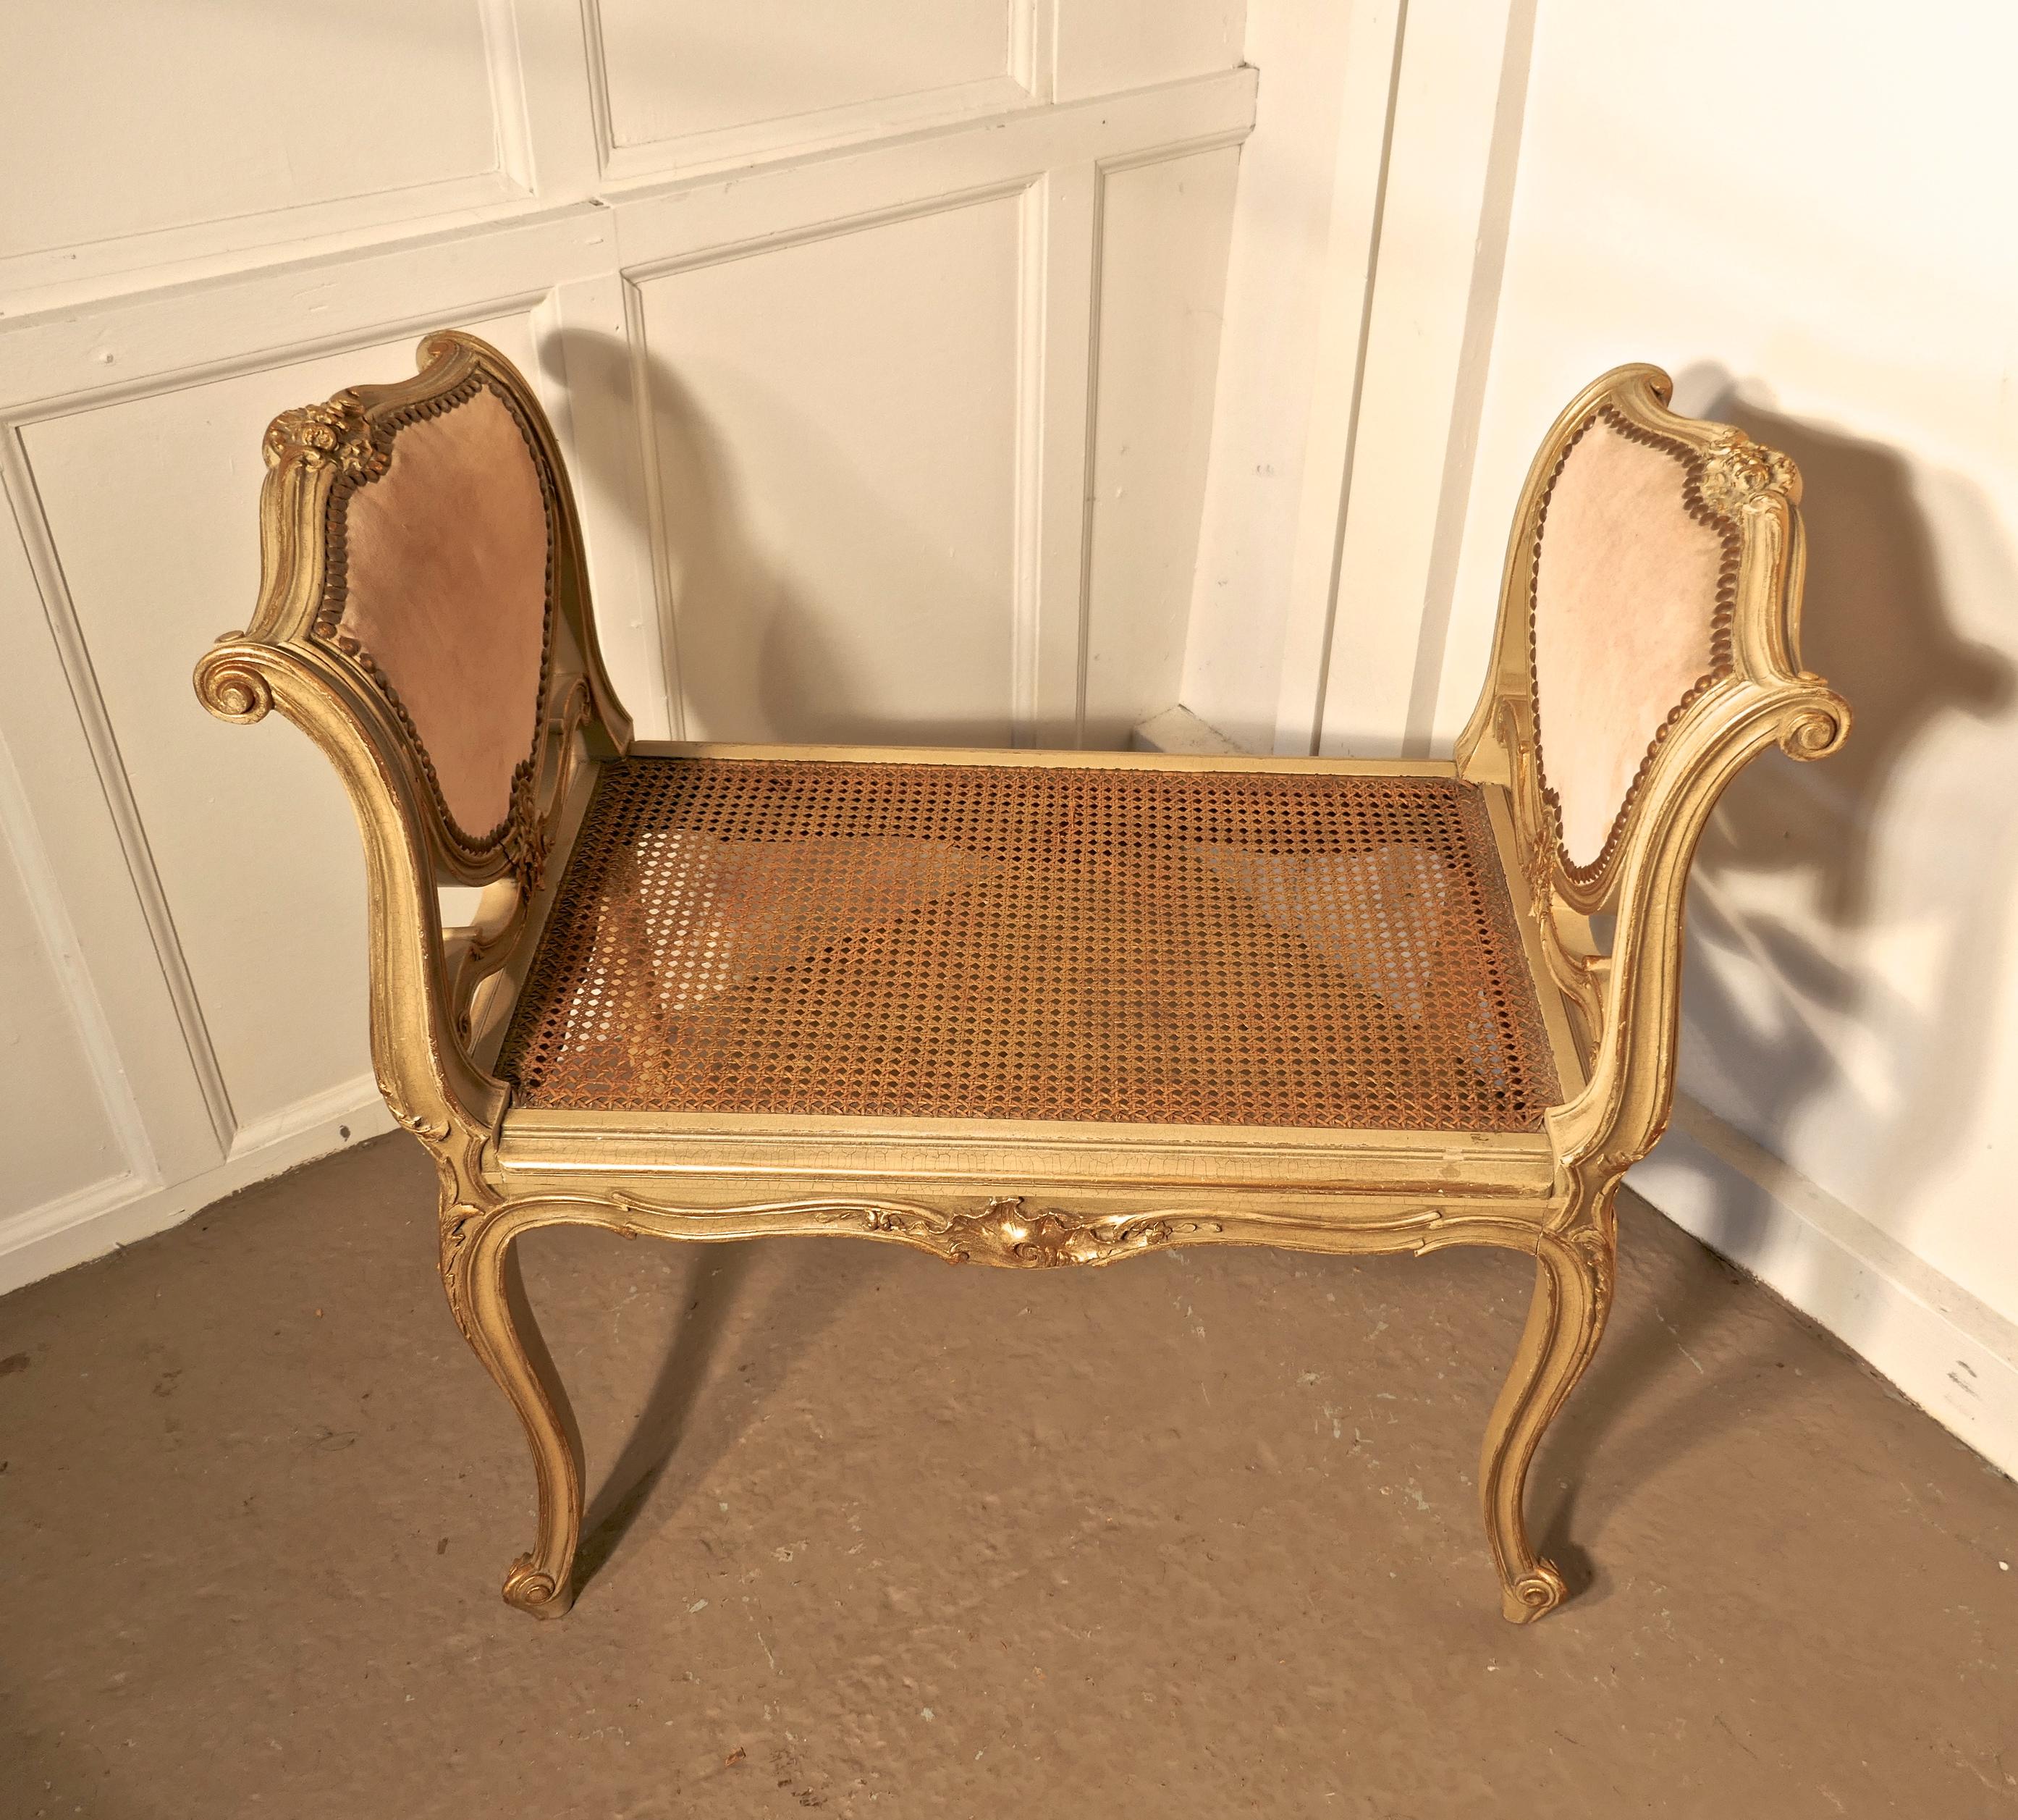  French Louis Philippe Dusky Pink  and Gilt Boudoir Window Seat

This is a delightful Piece of Louis Style Painted Chic furniture, the high arms on either side has heart shaped panels upholstered in dusky pink velour
The painted legs, arms and apron